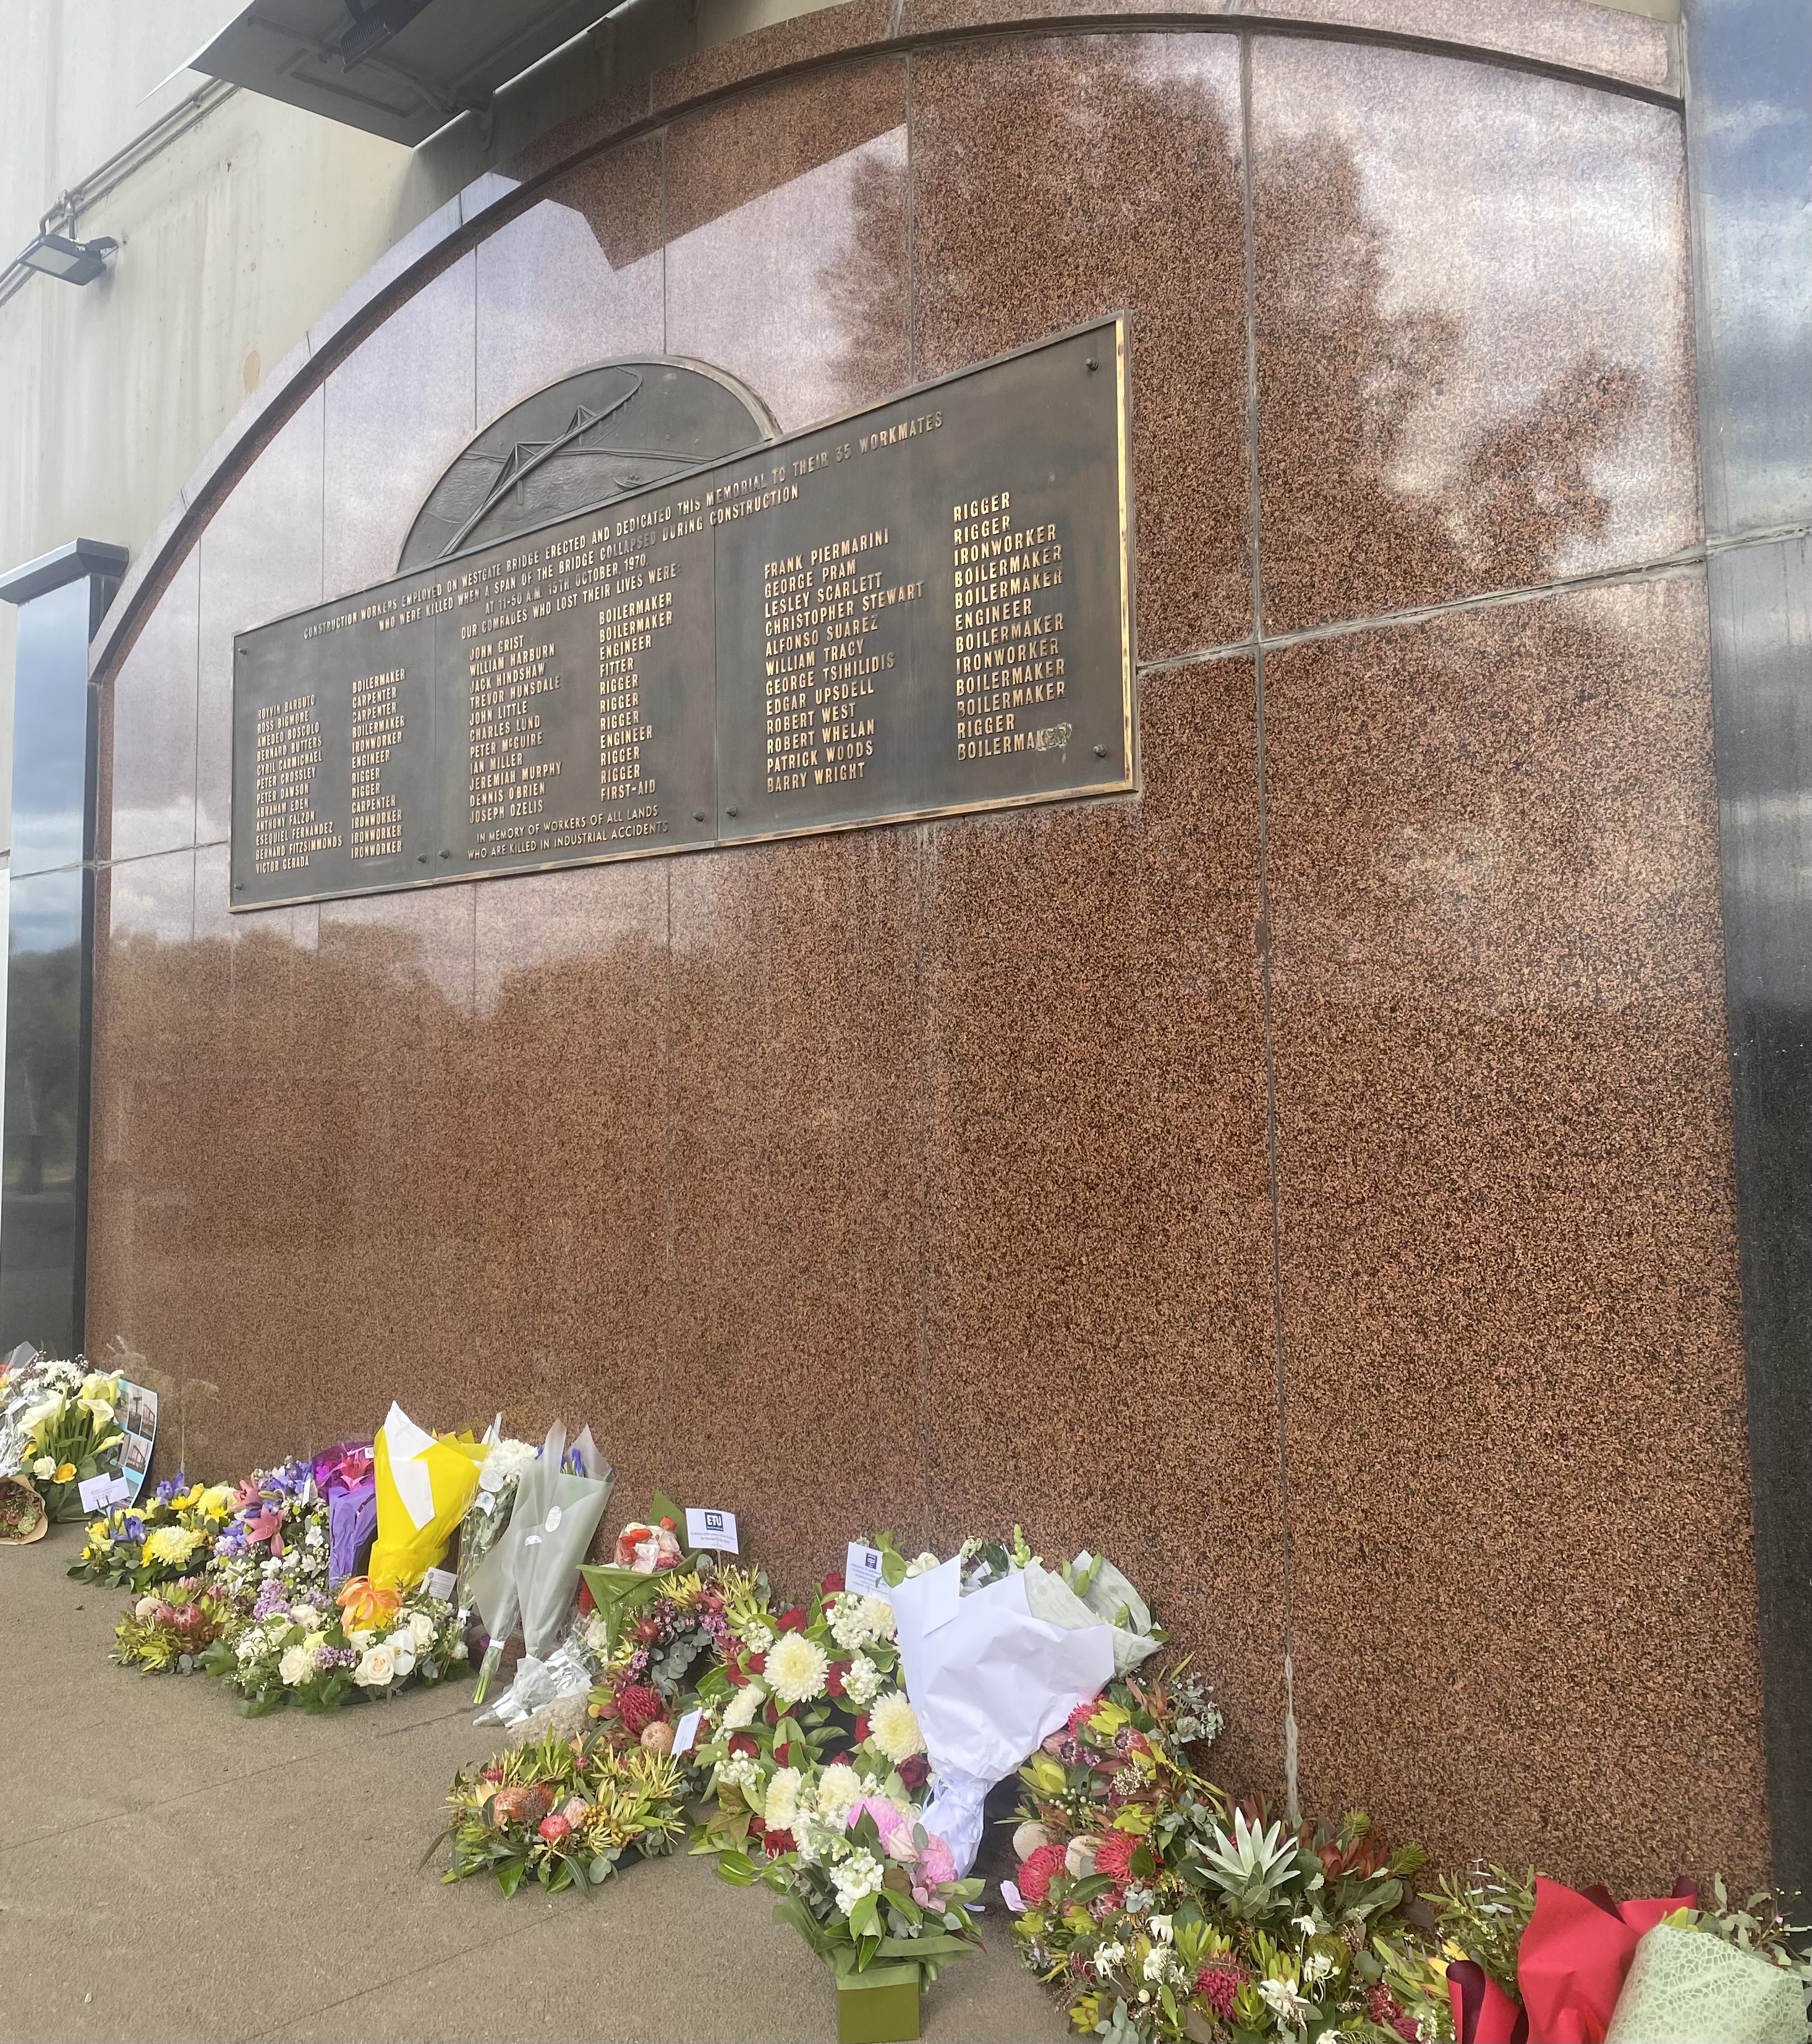 Memorial plaque on the Westgate bridge (paid for and erected by fellow workers of the victims), with flowers and tributes from the 2022 memorial service.